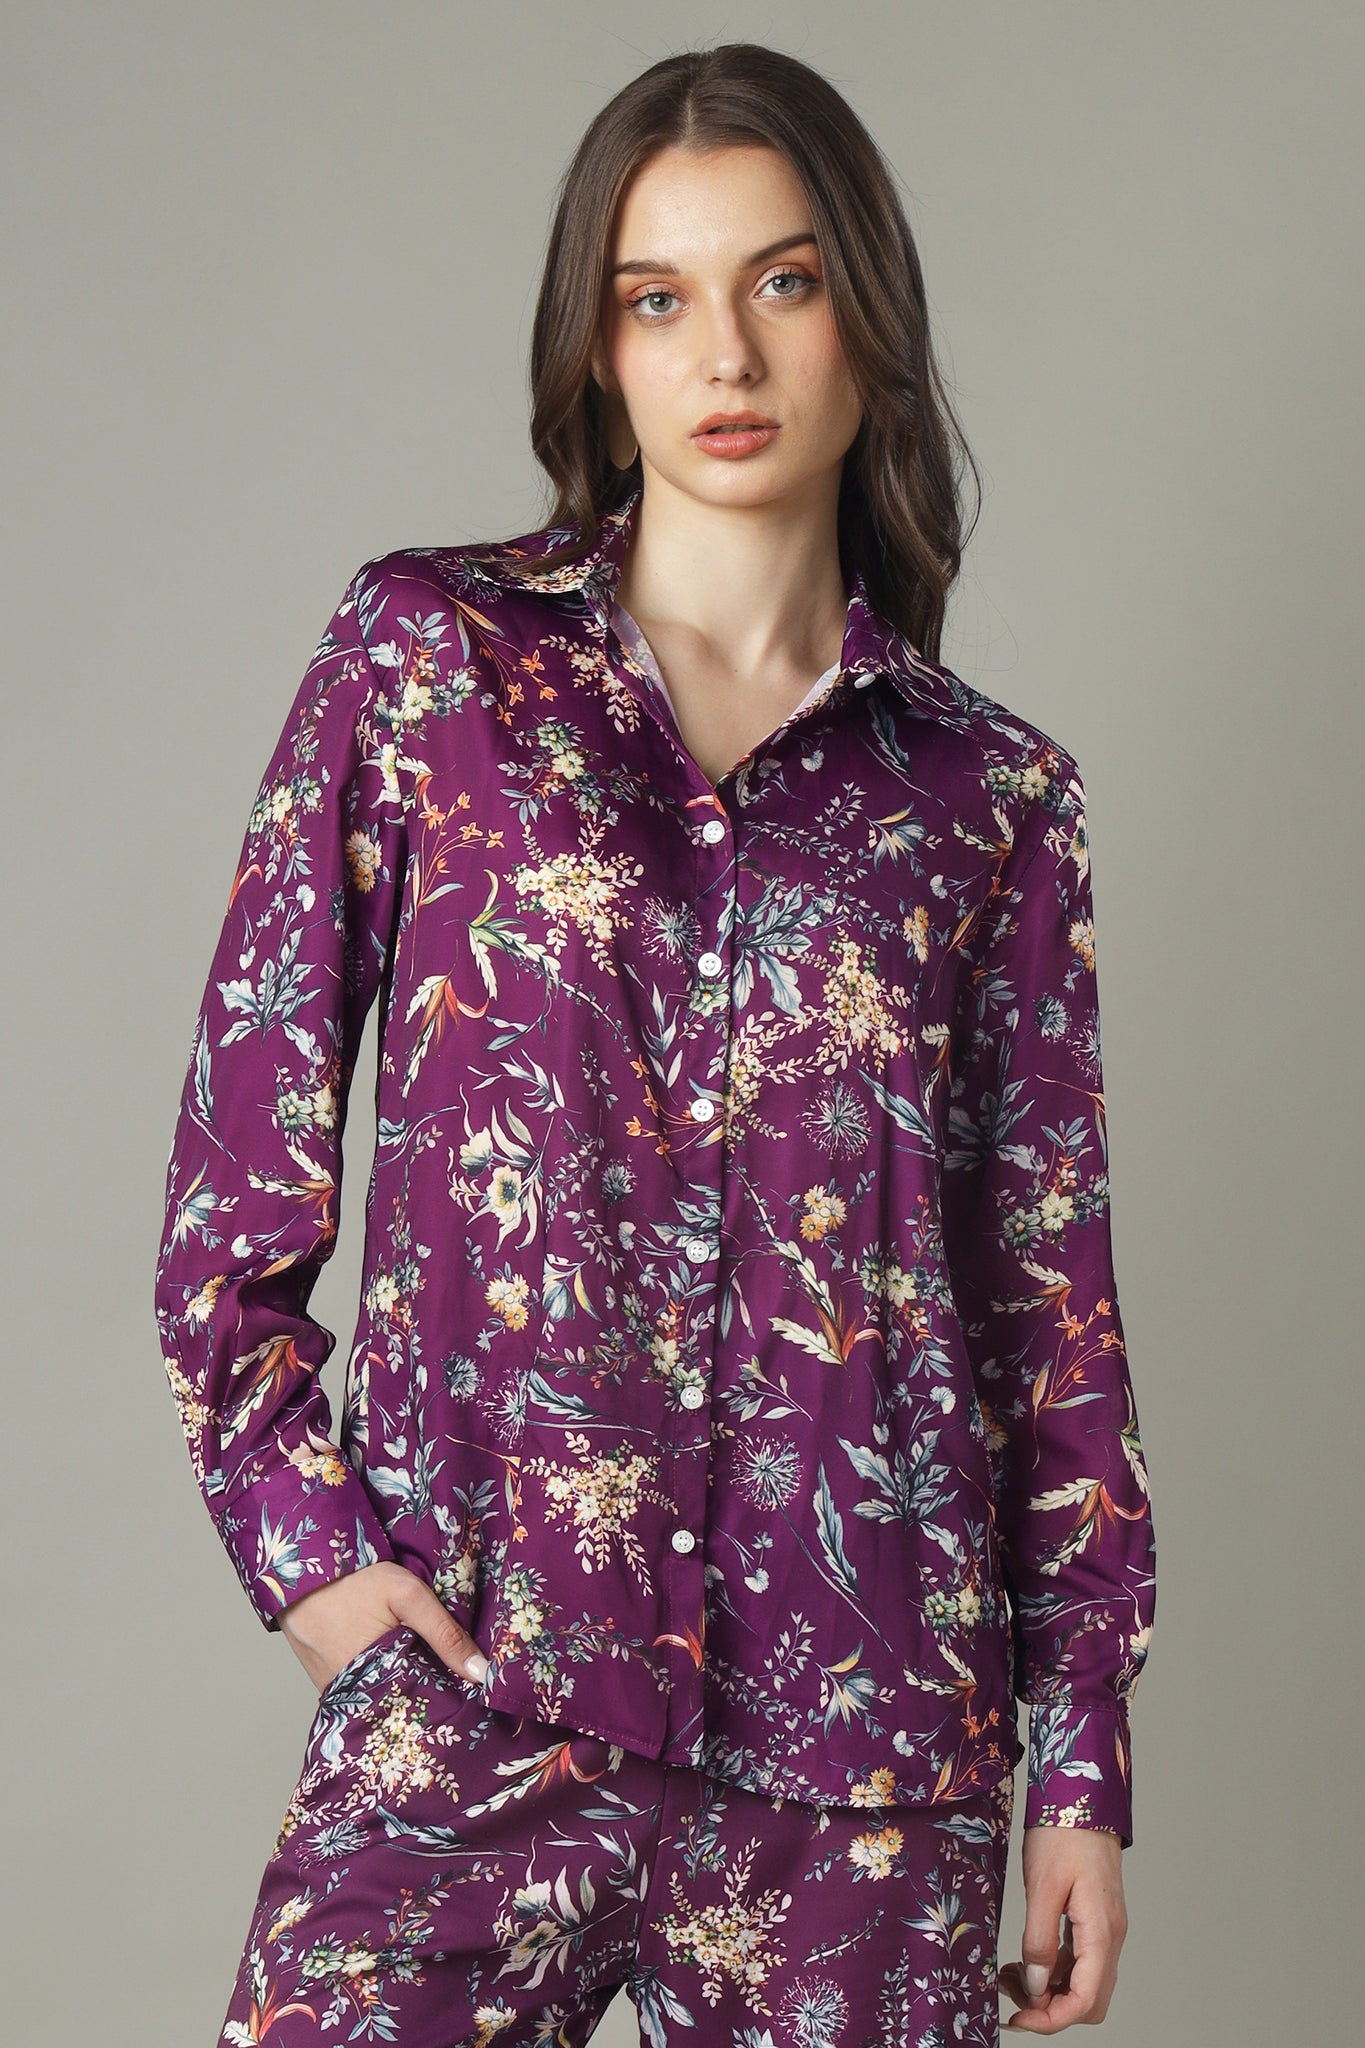 Stay In Vogue With Our Floral Shirt For Women